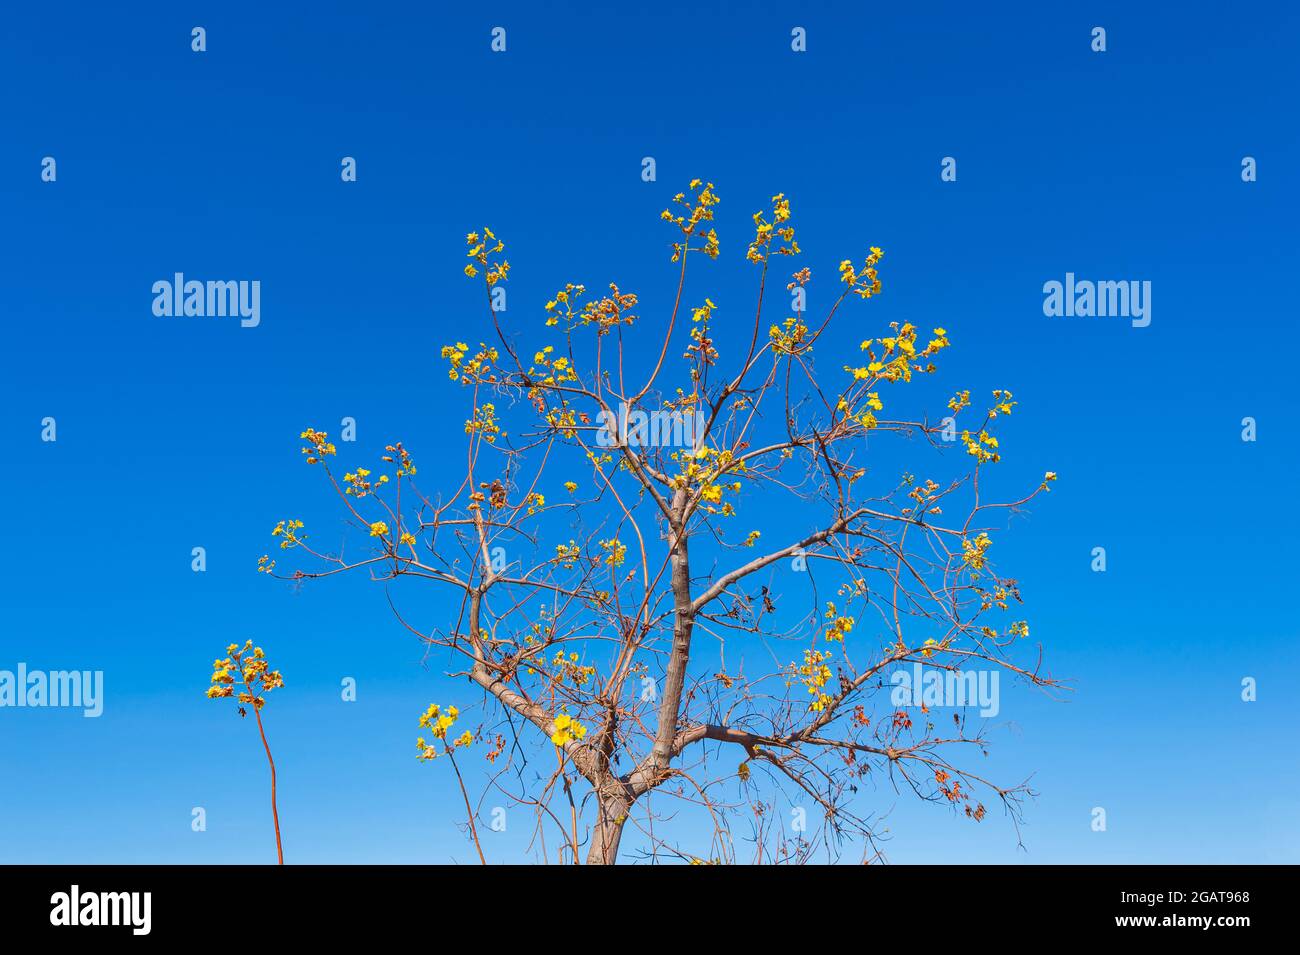 Kapok tree in bloom with yellow flowers against a blue sky in the Outback, Mornington Wilderness Camp, Gibb River Road, Kimberley Region, Western Aust Stock Photo